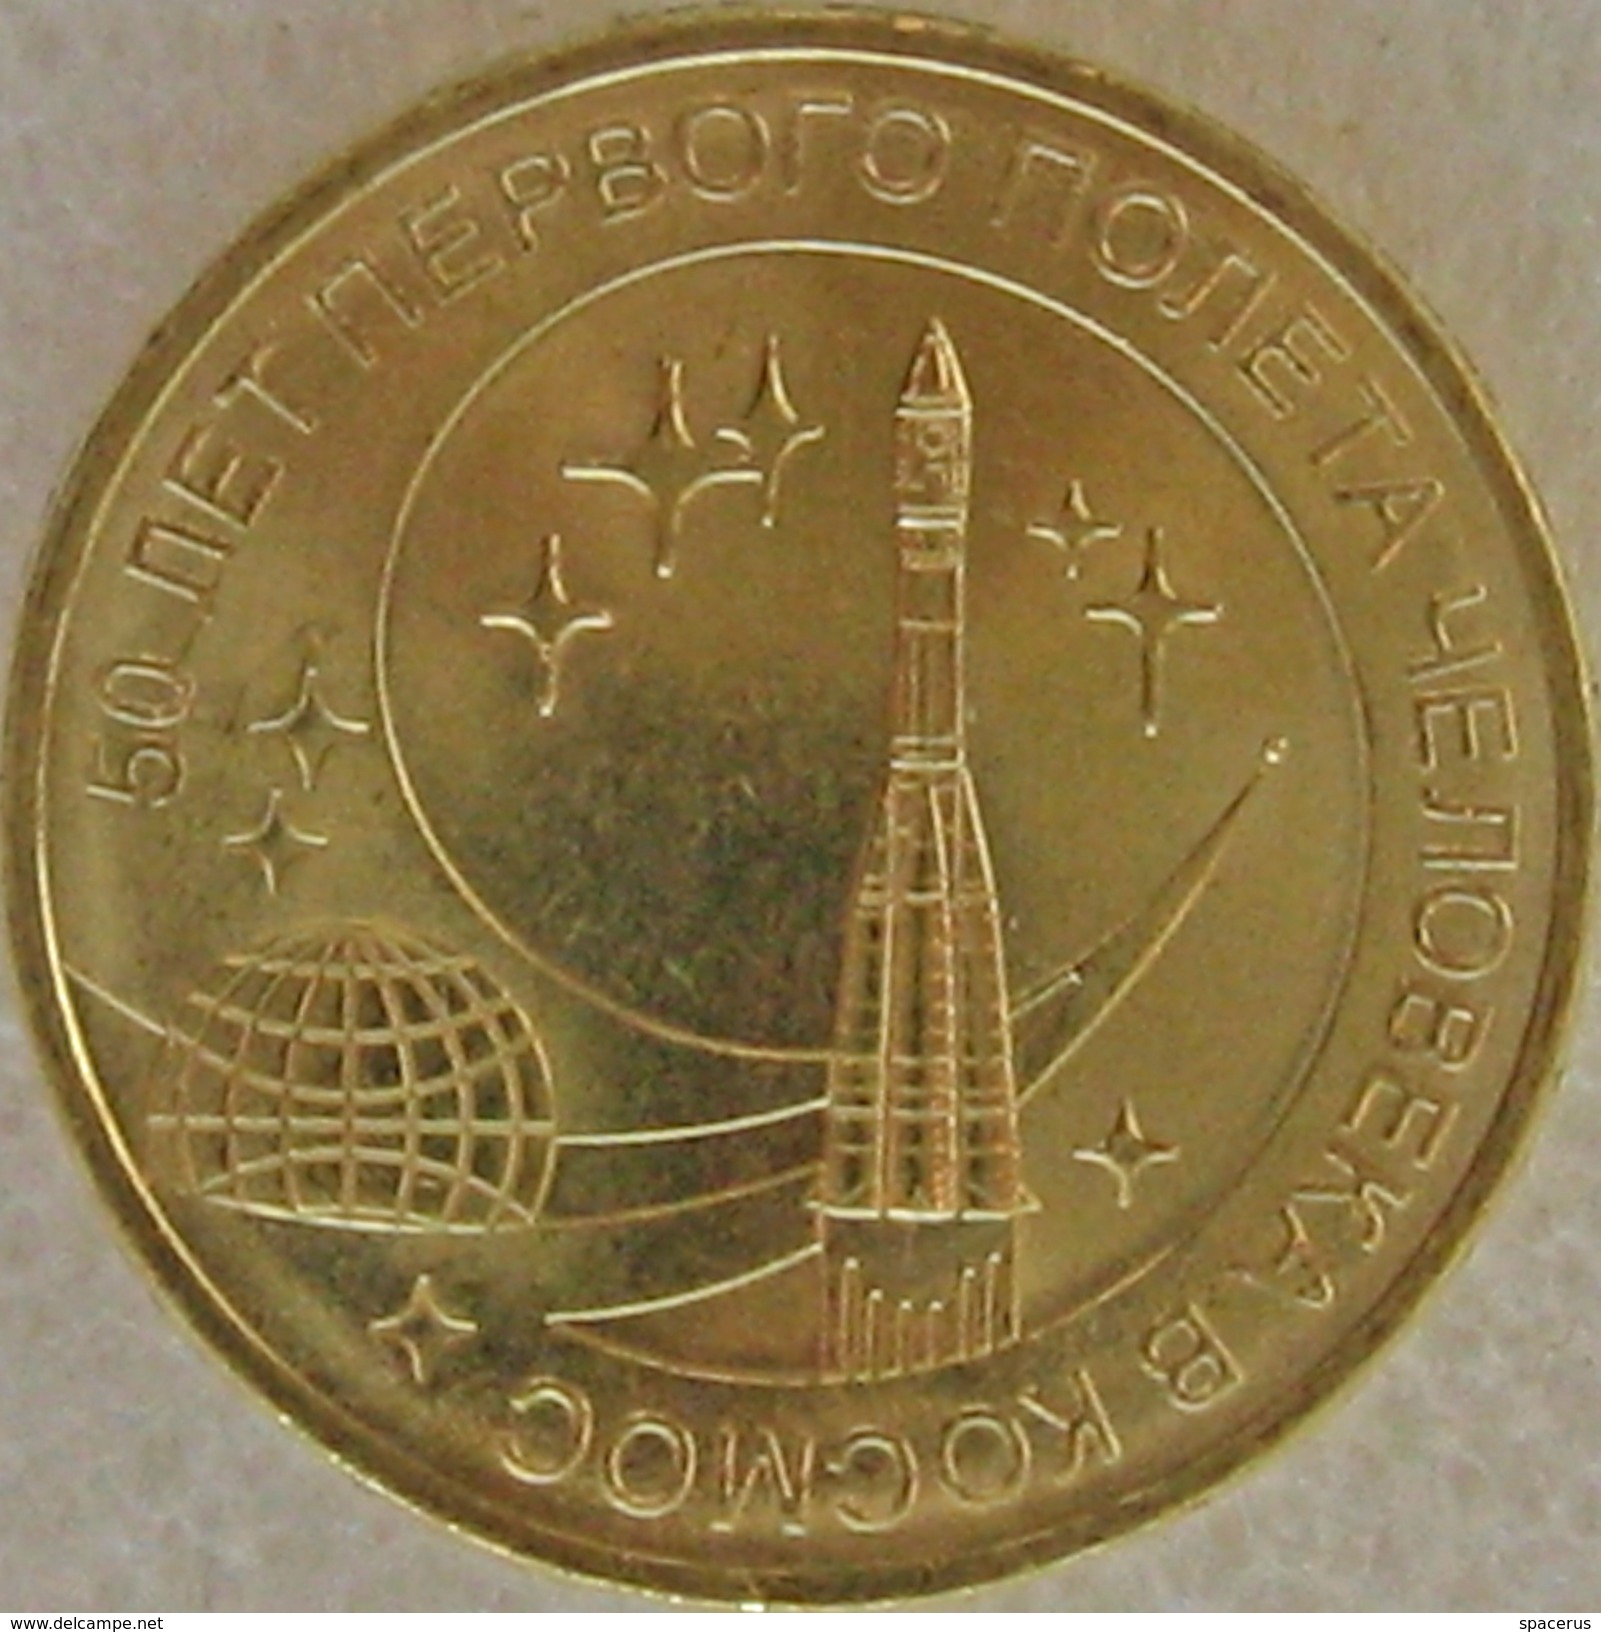 9 RUSSIA Coin 10 ROUBLES GAGARIN - FIRST MAN In SPACE 50 Anniversary 2011 (1 Coin) - Russia